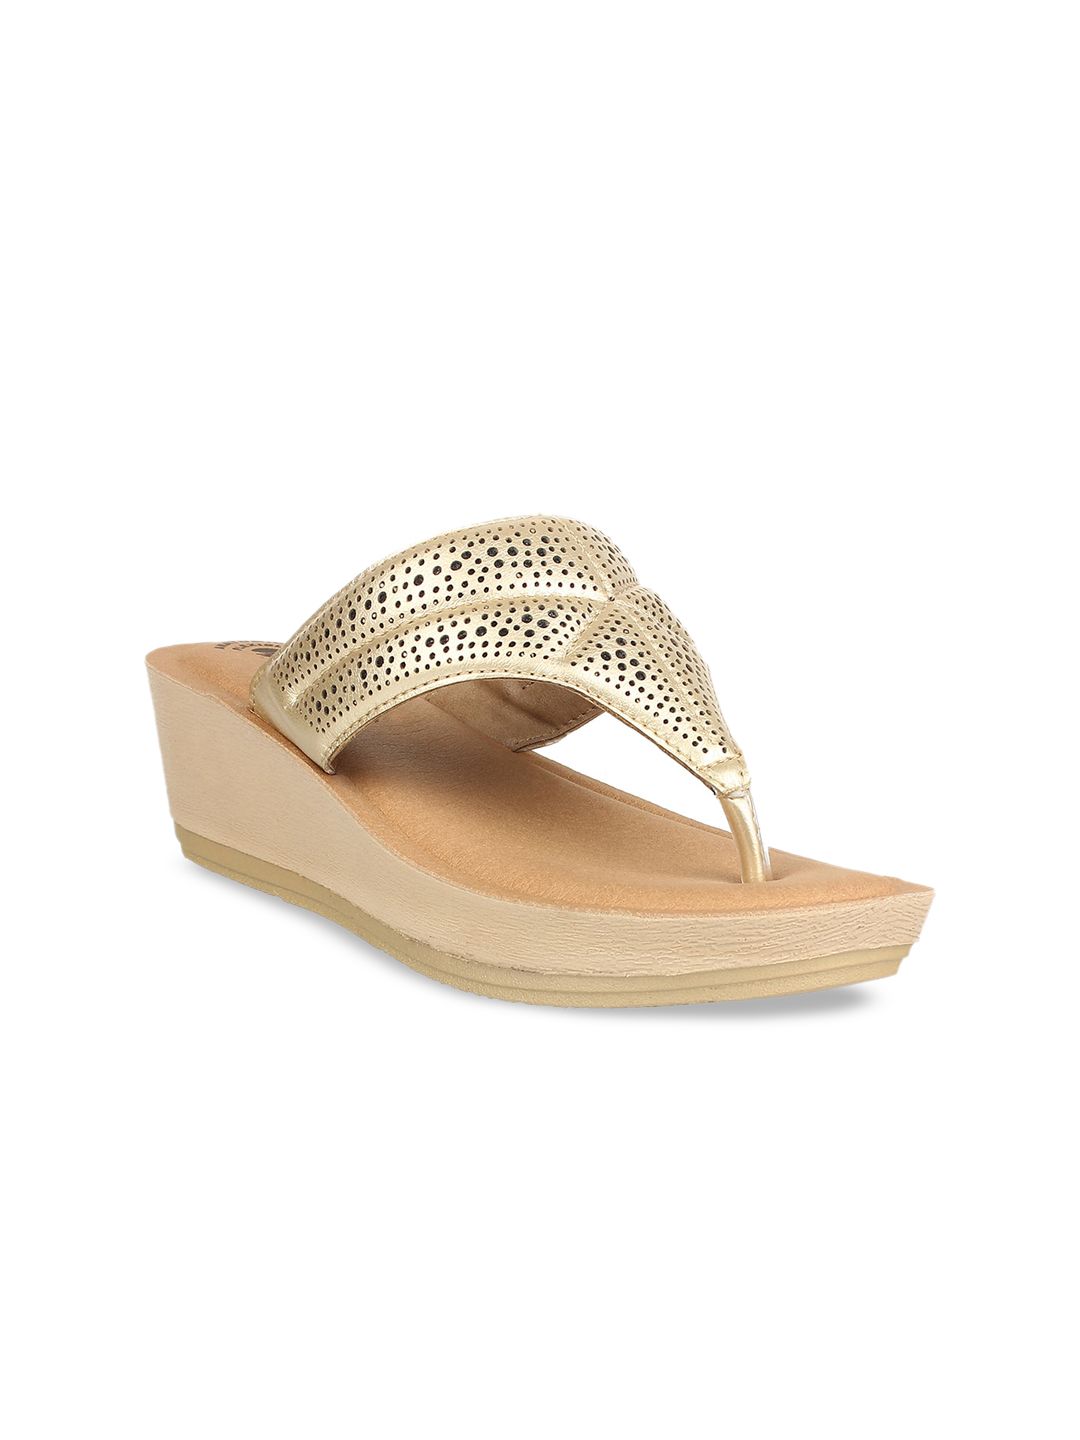 Inblu Women Gold-Toned Embellished Wedges Price in India